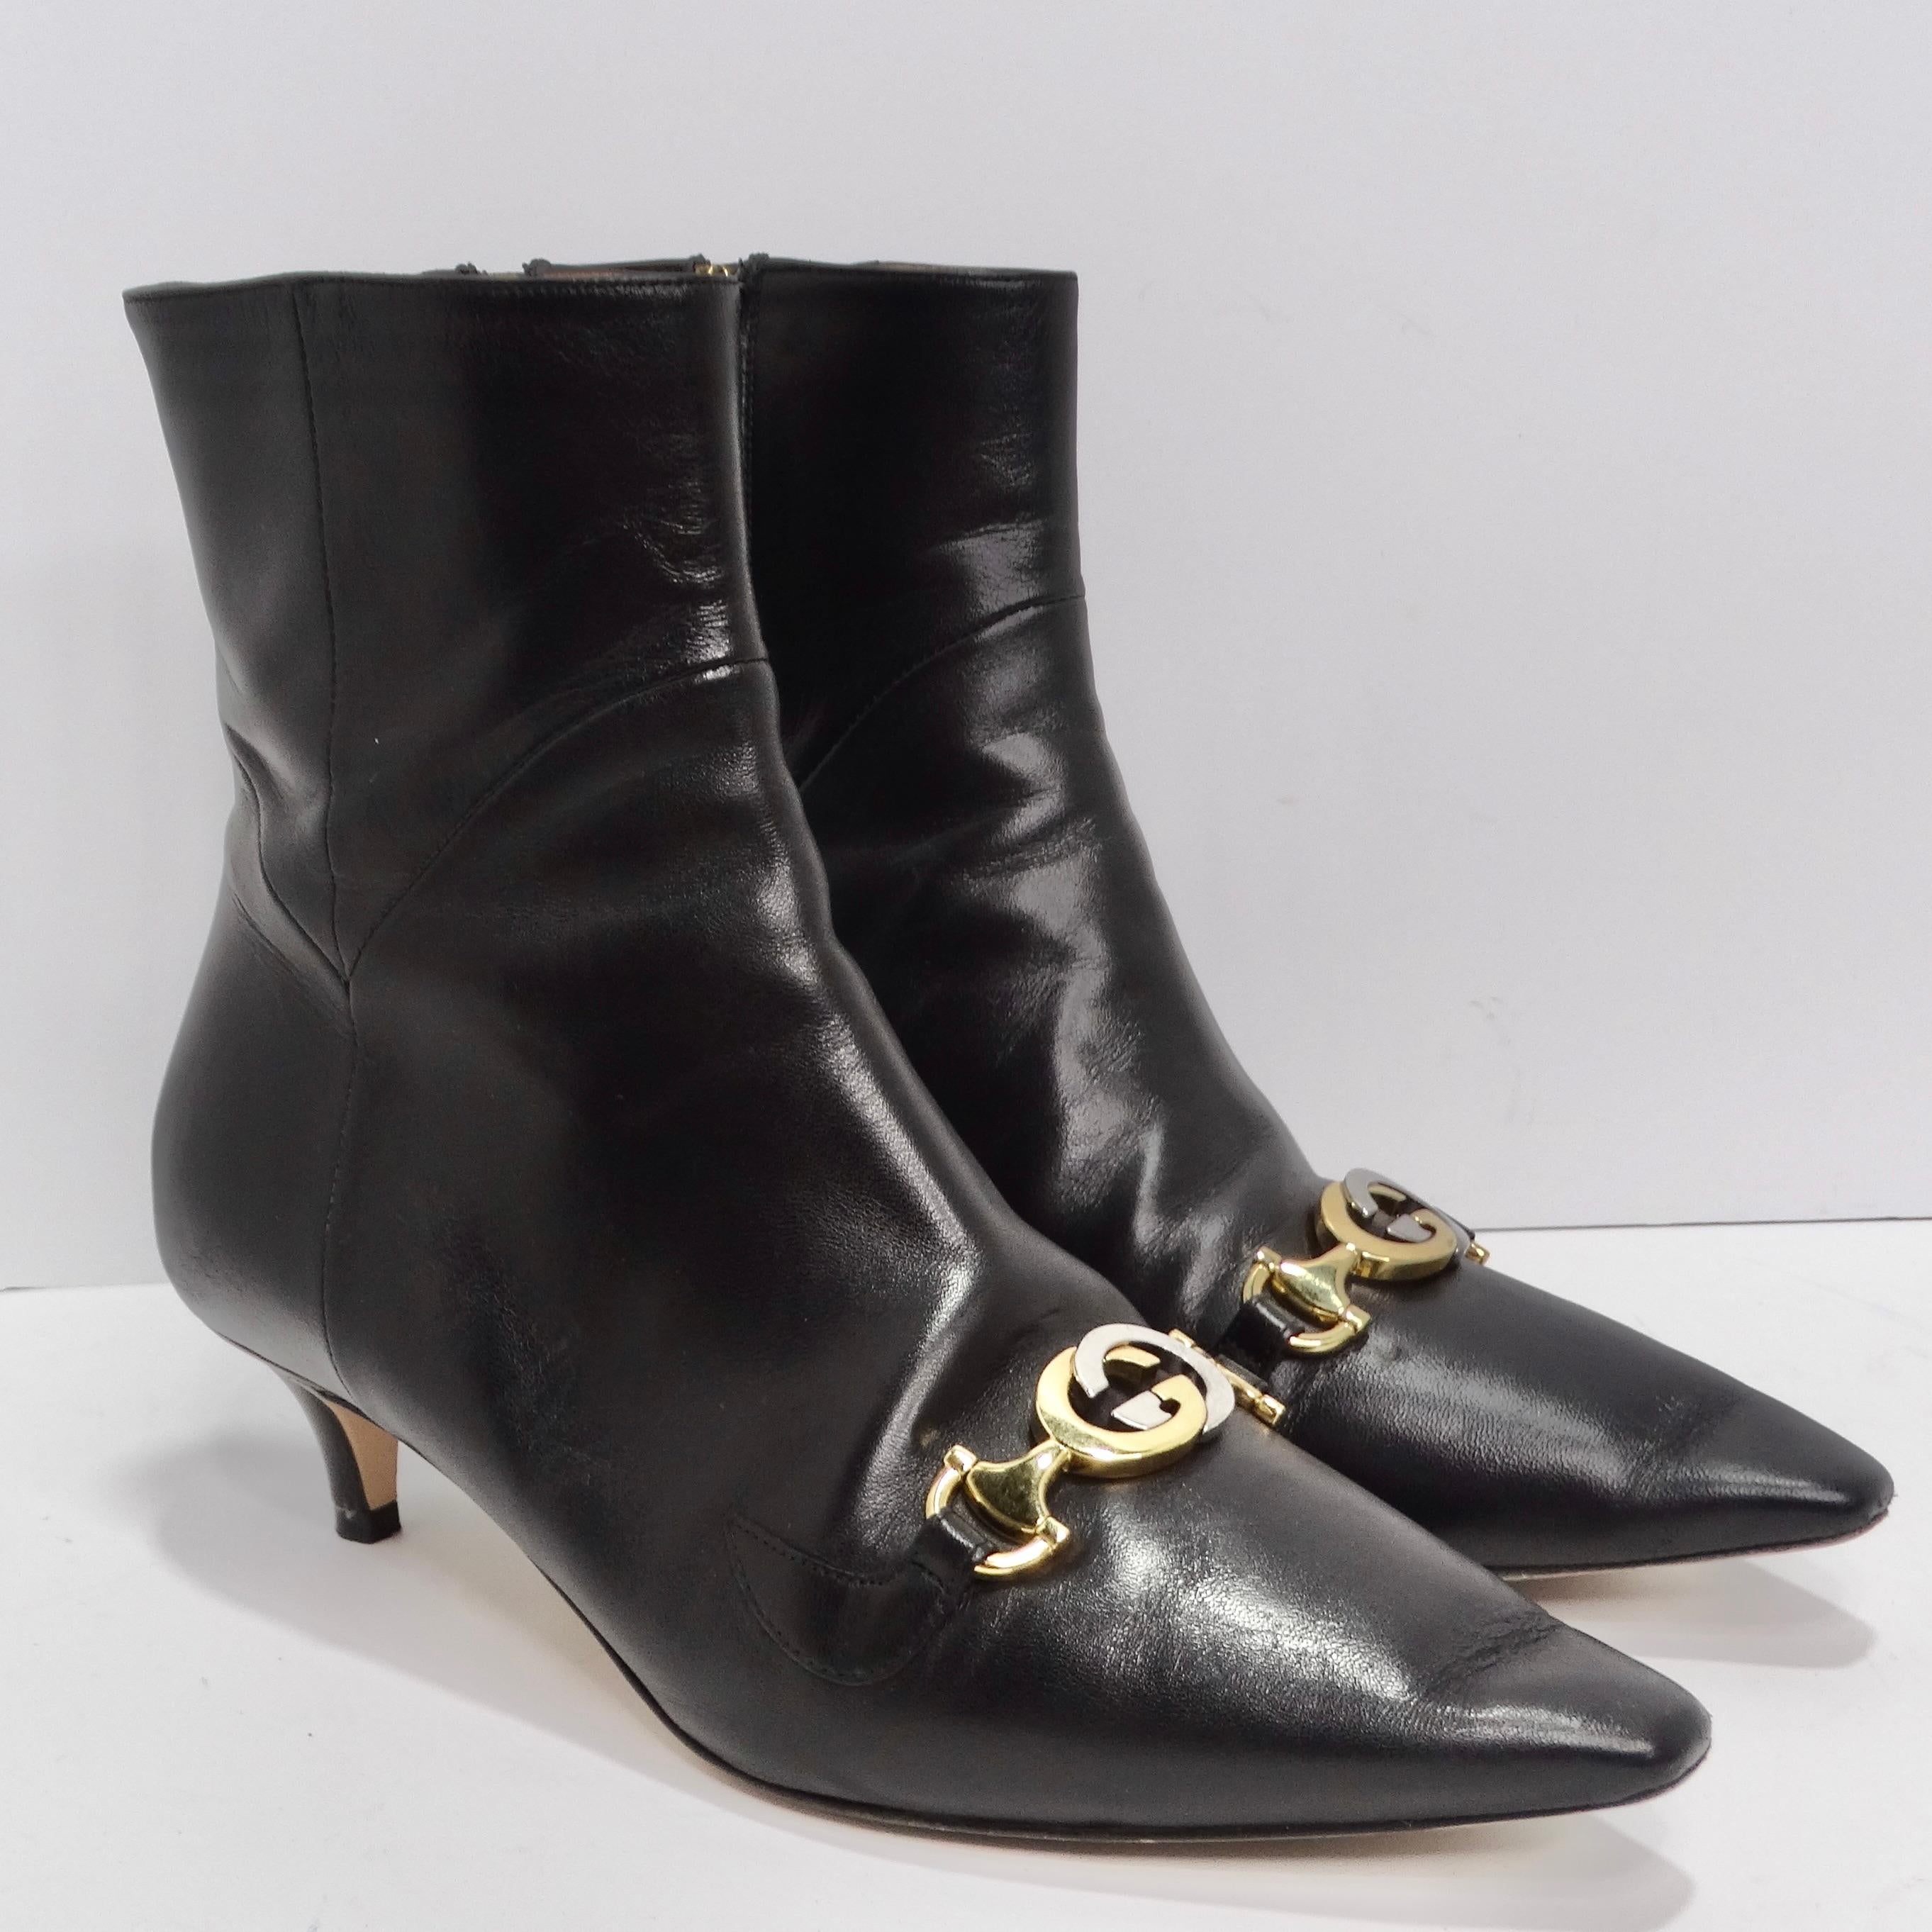 Gucci Leather Zumi Kitten Heel Ankle Boots For Sale 4